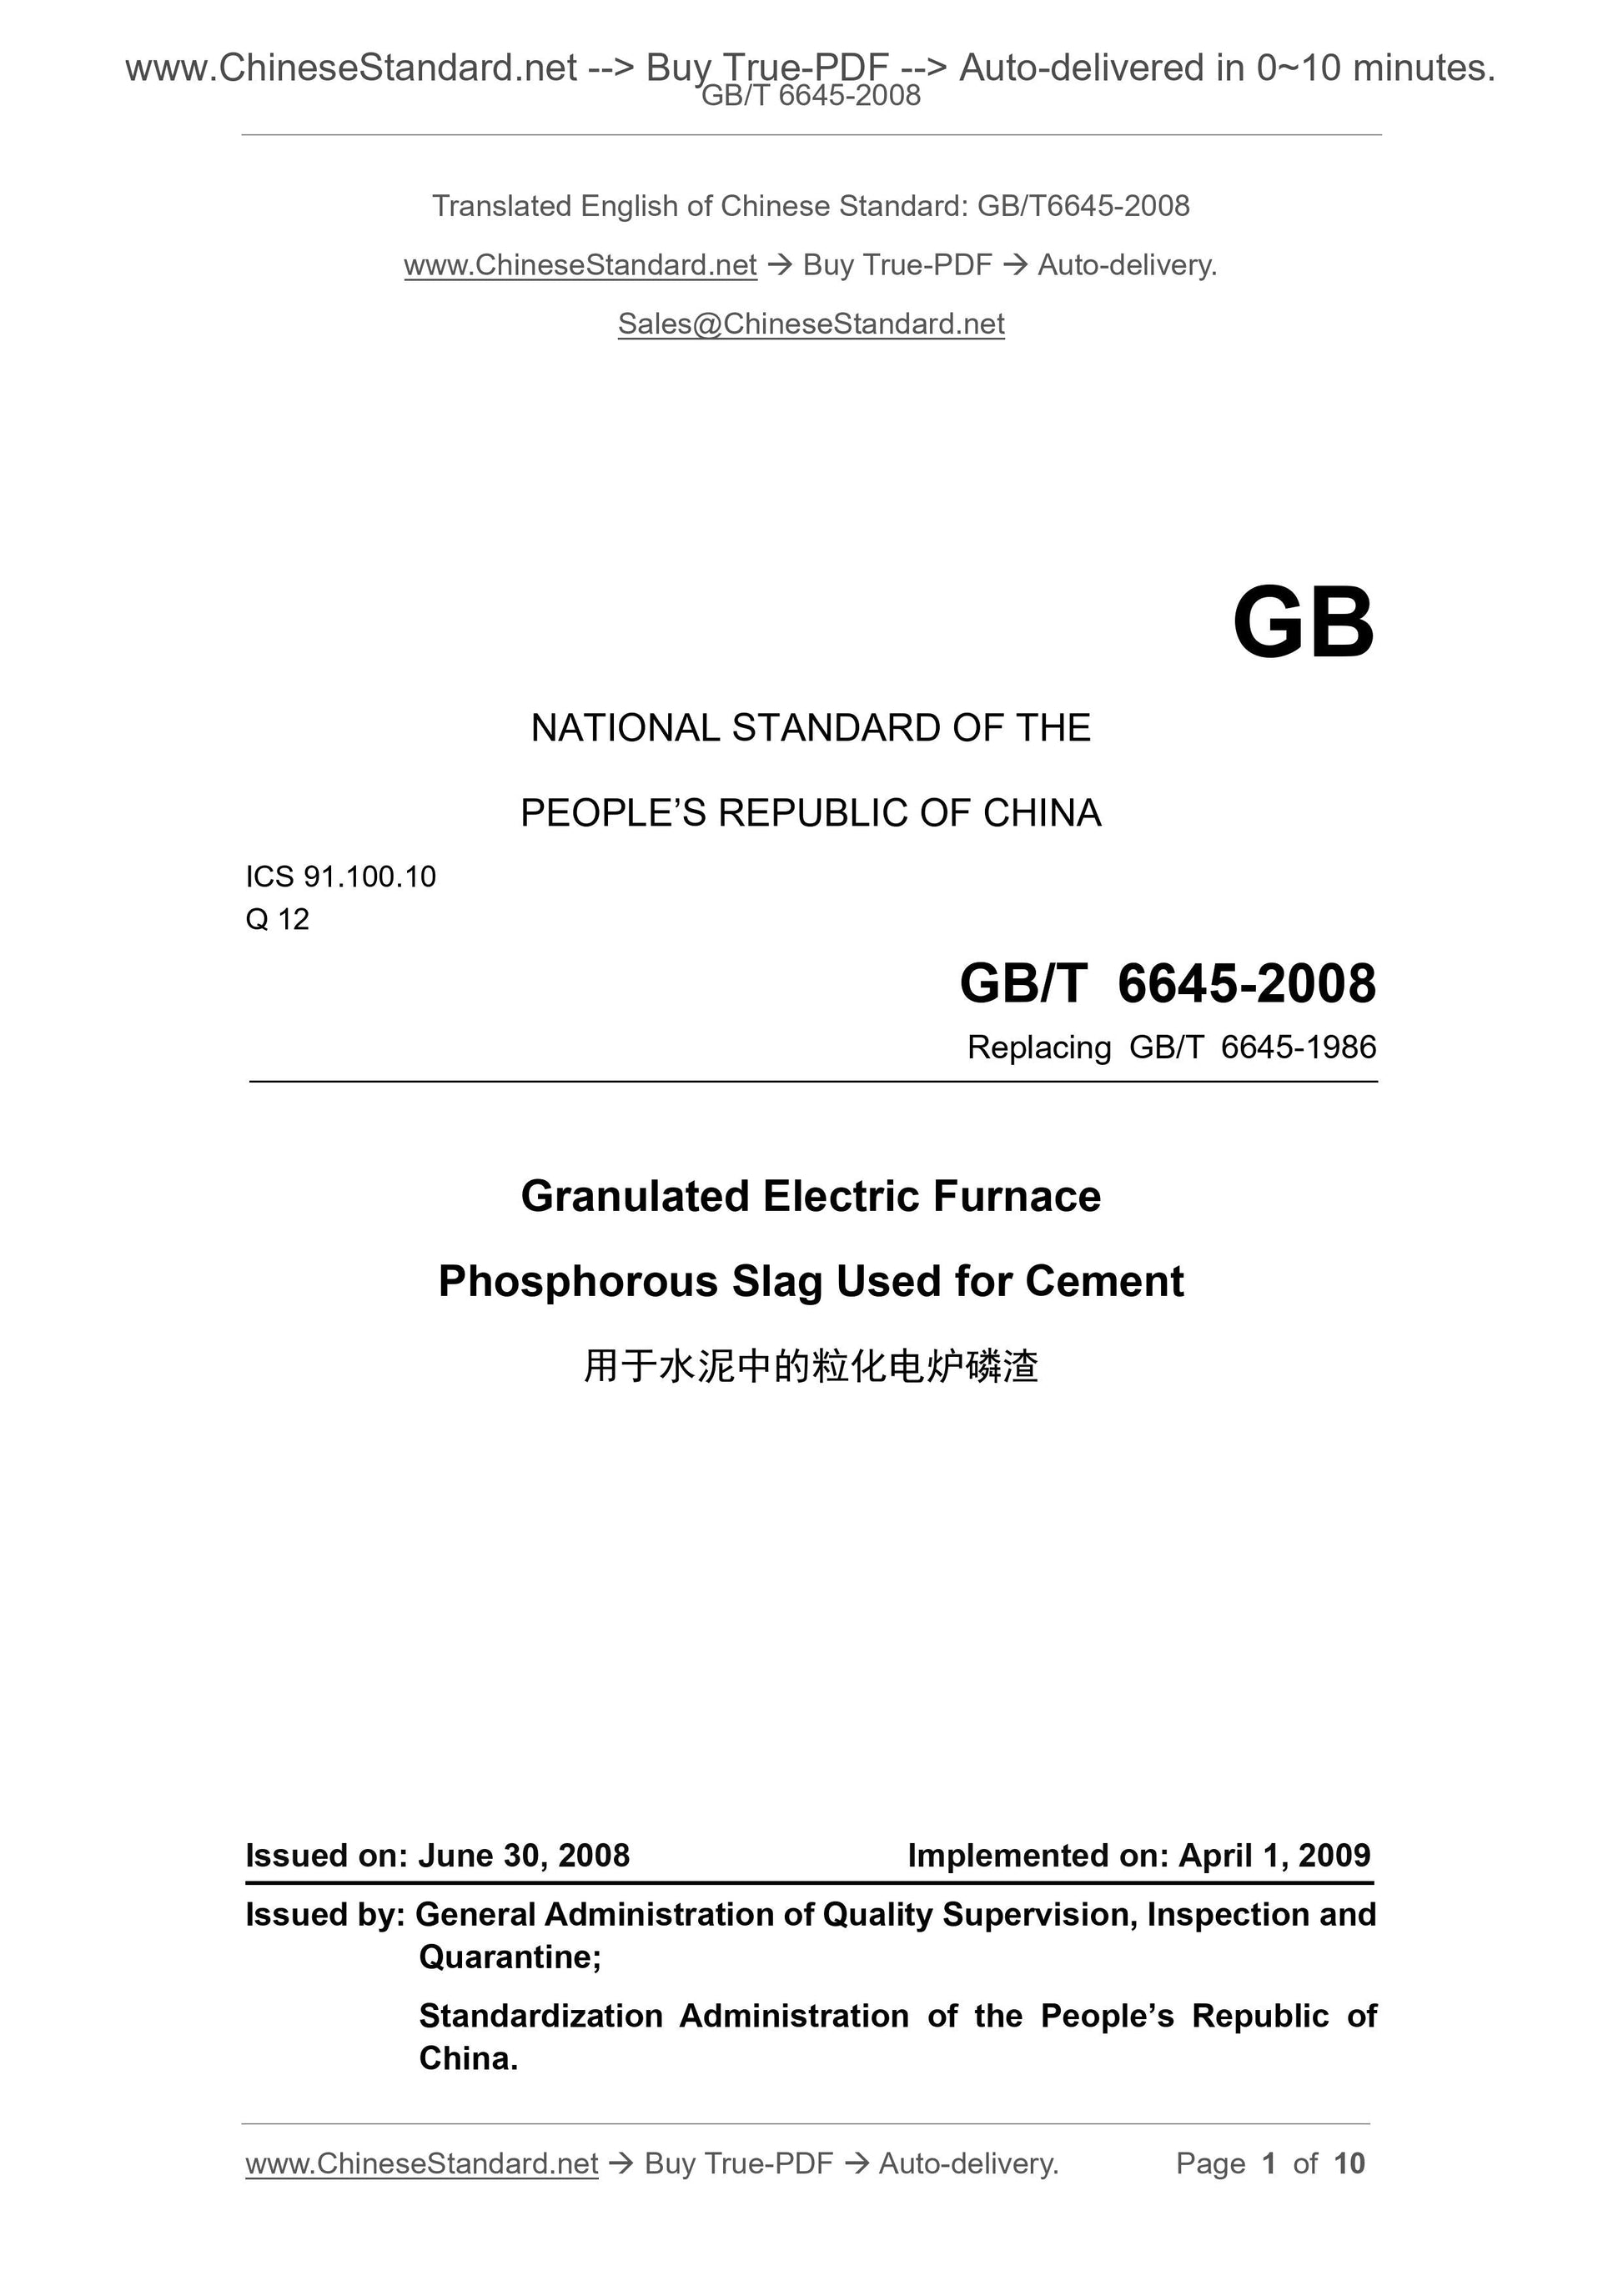 GB/T 6645-2008 Page 1